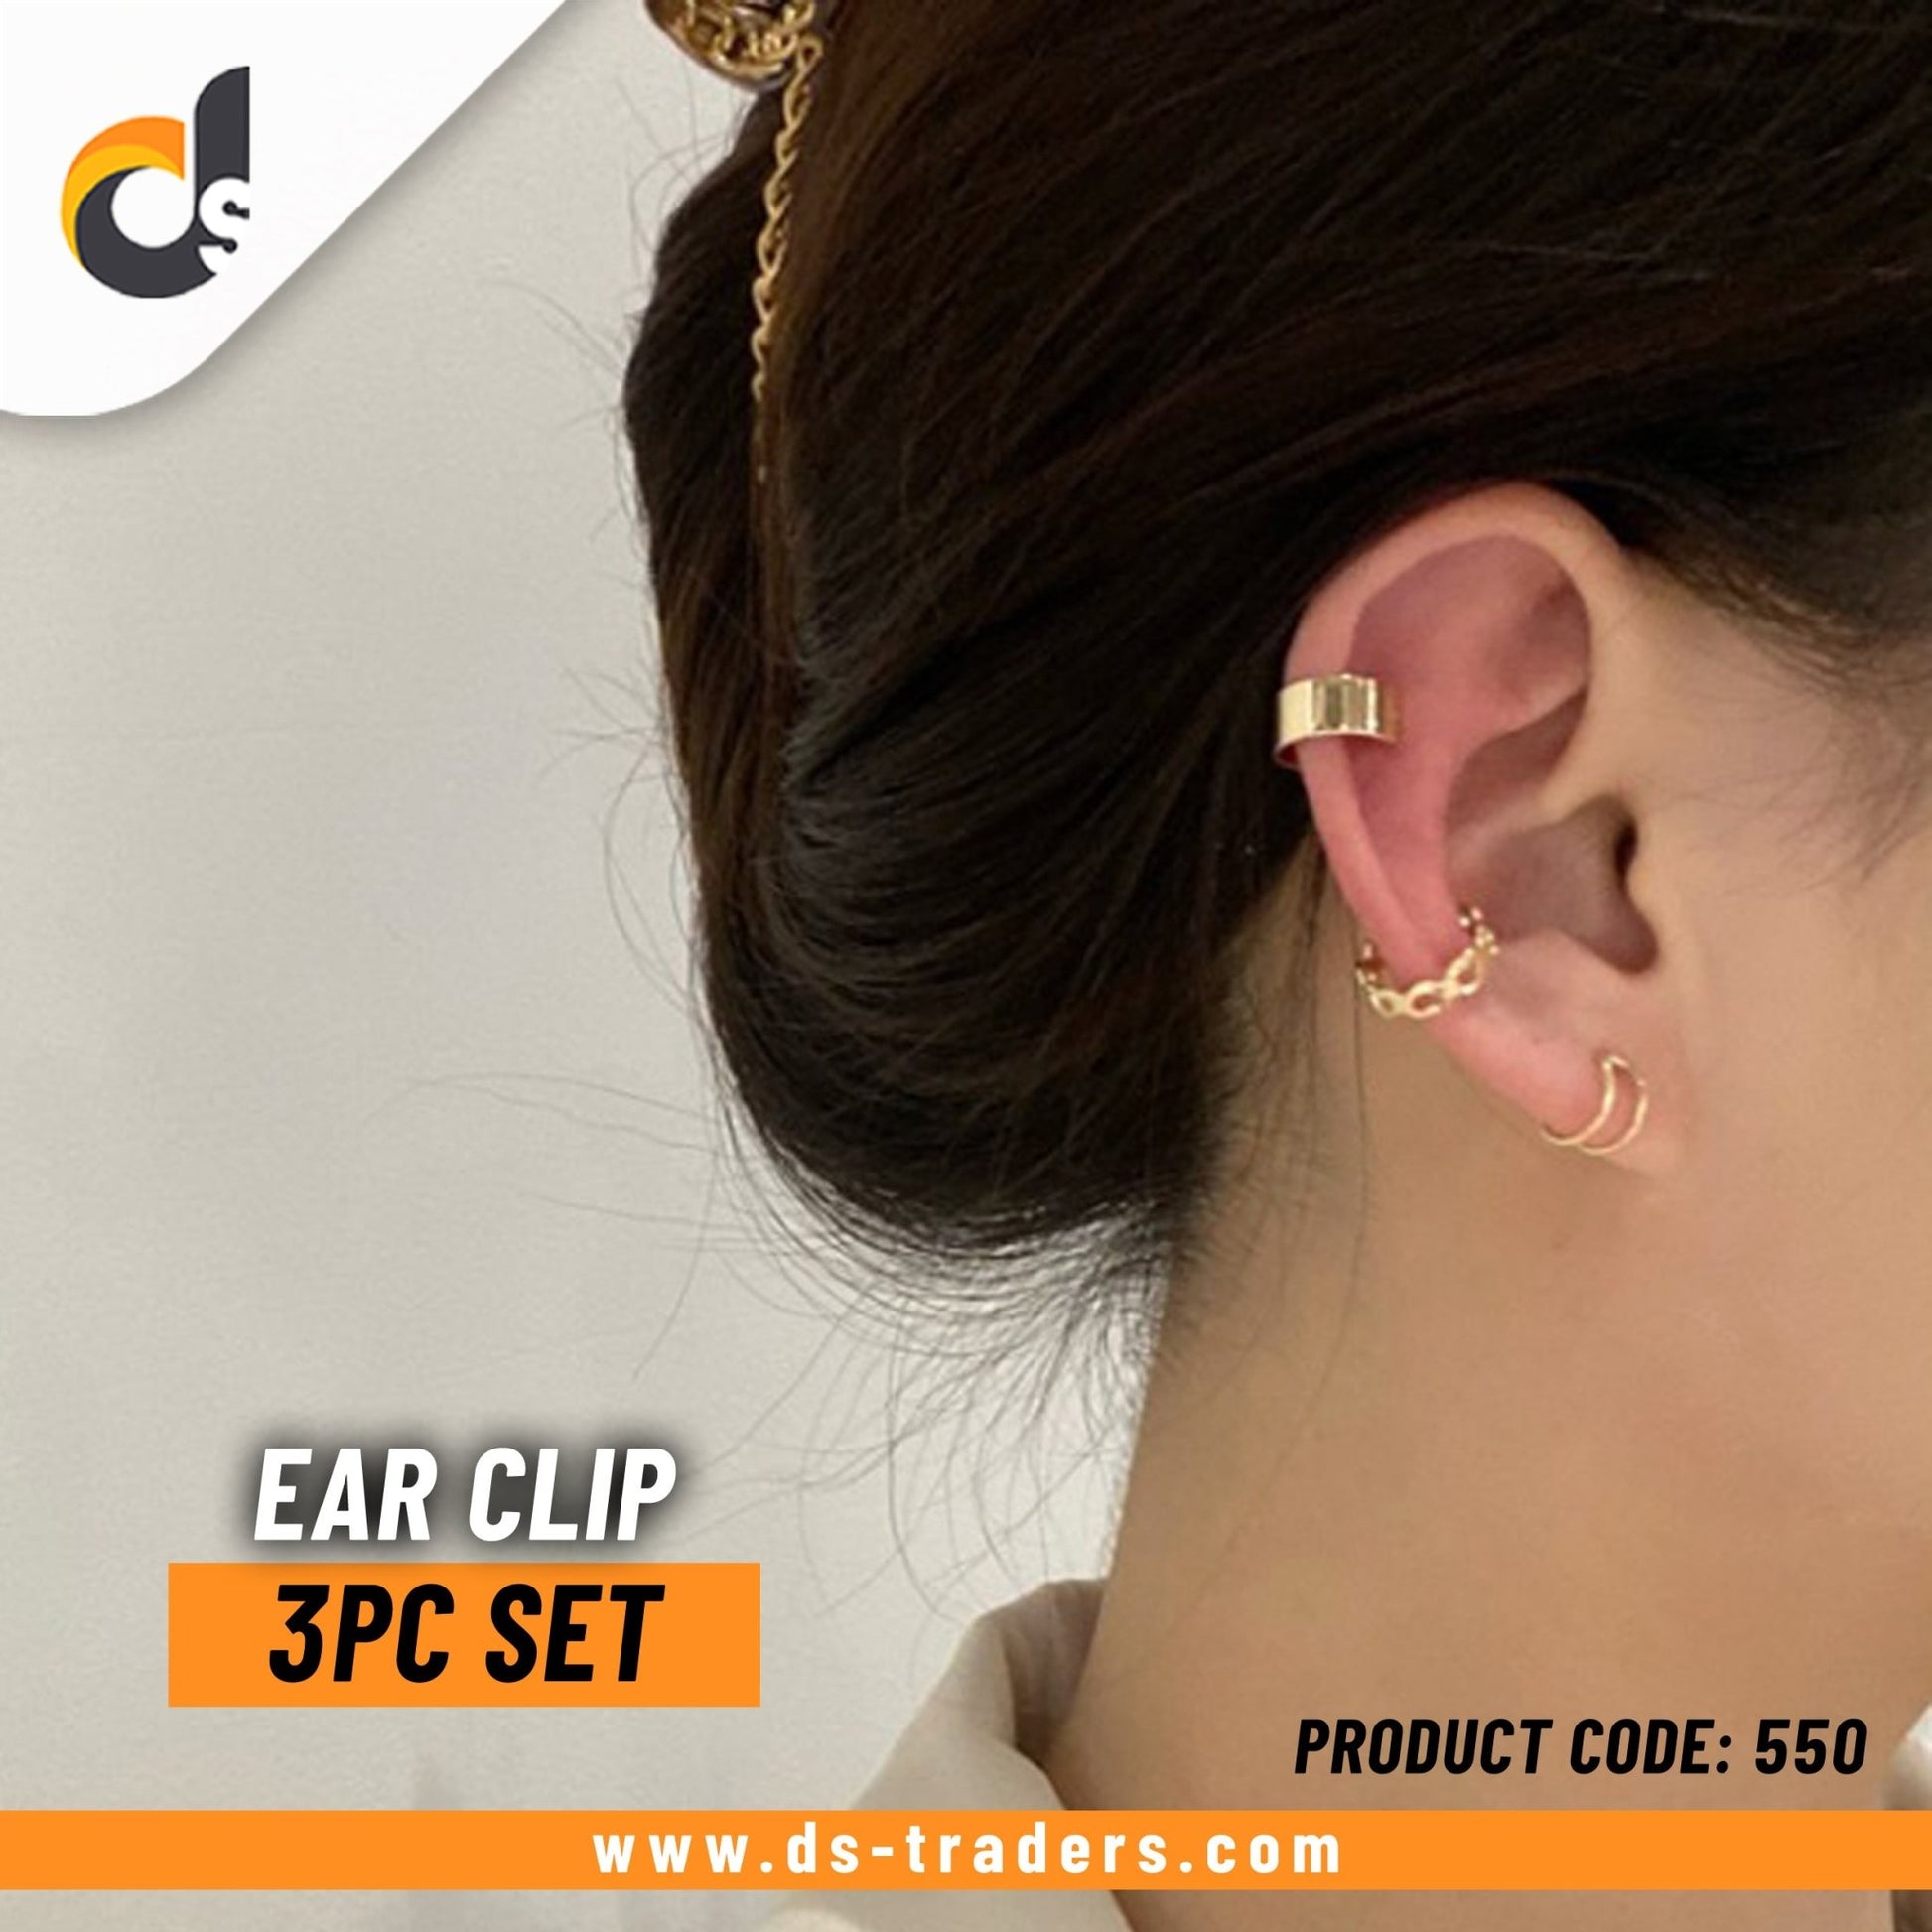 Ear Clip 3pc Set - DS Traders